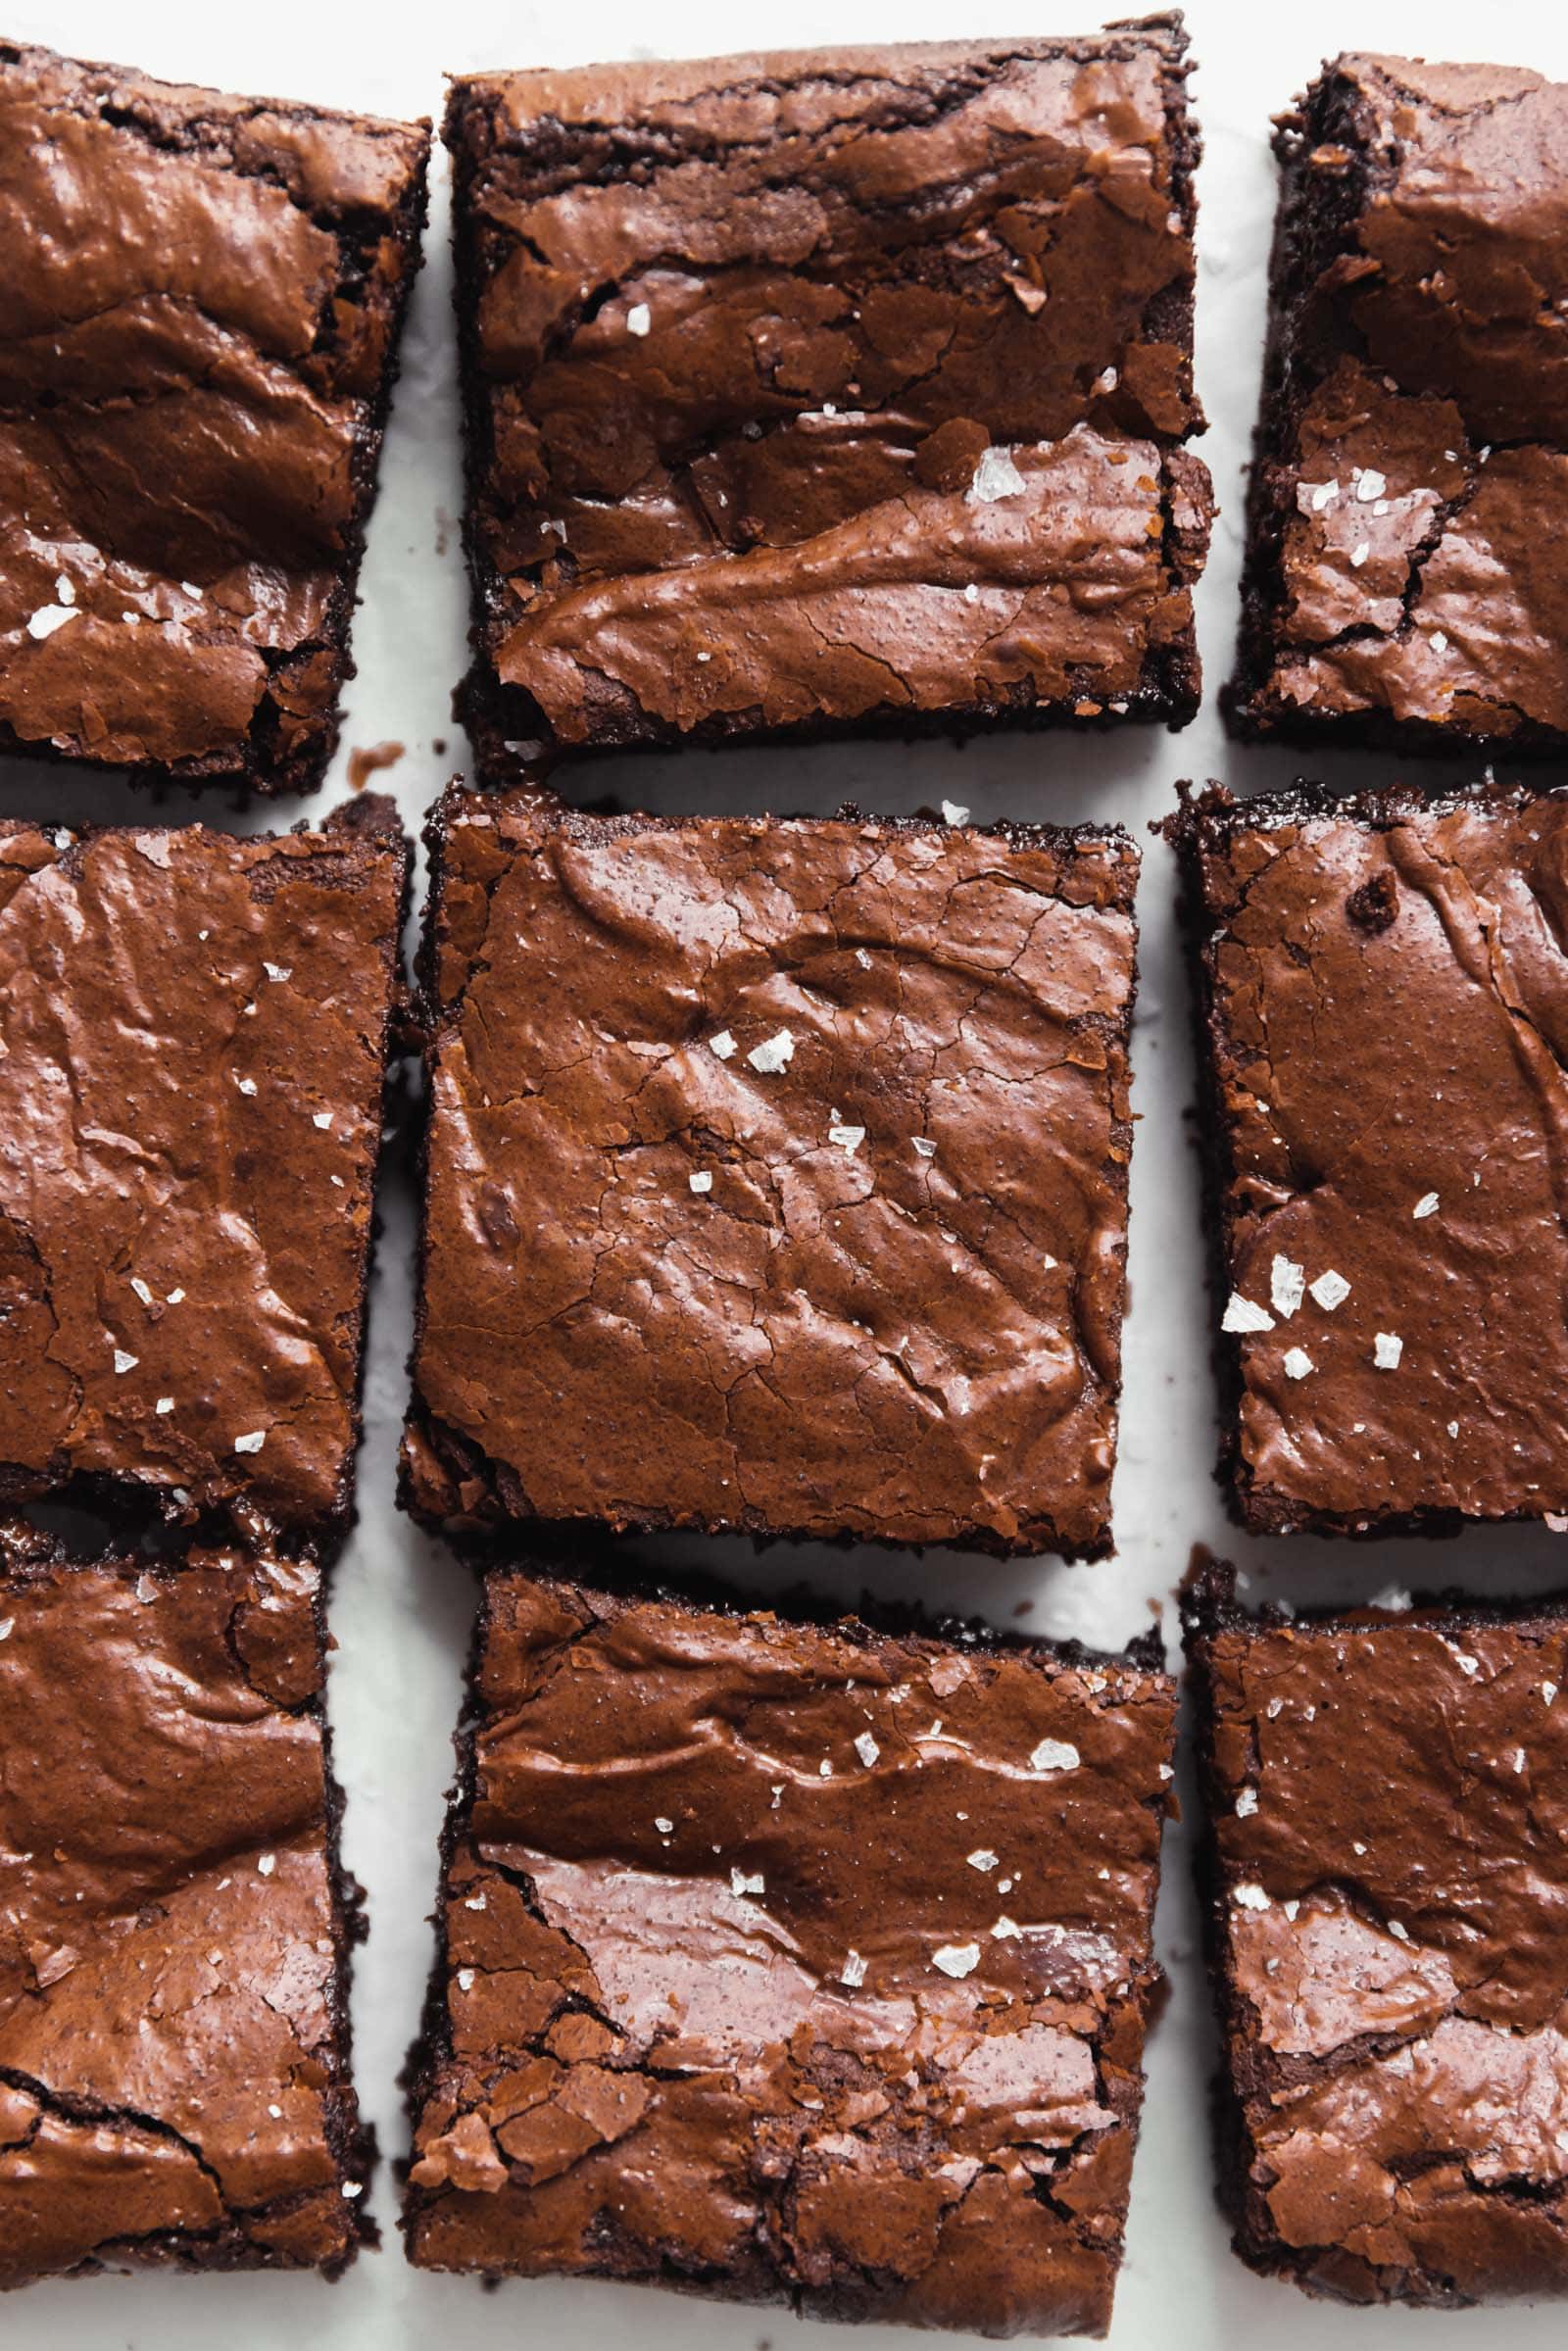 https://bromabakery.com/wp-content/uploads/2023/03/Browned-Butter-Brownies-2.jpg